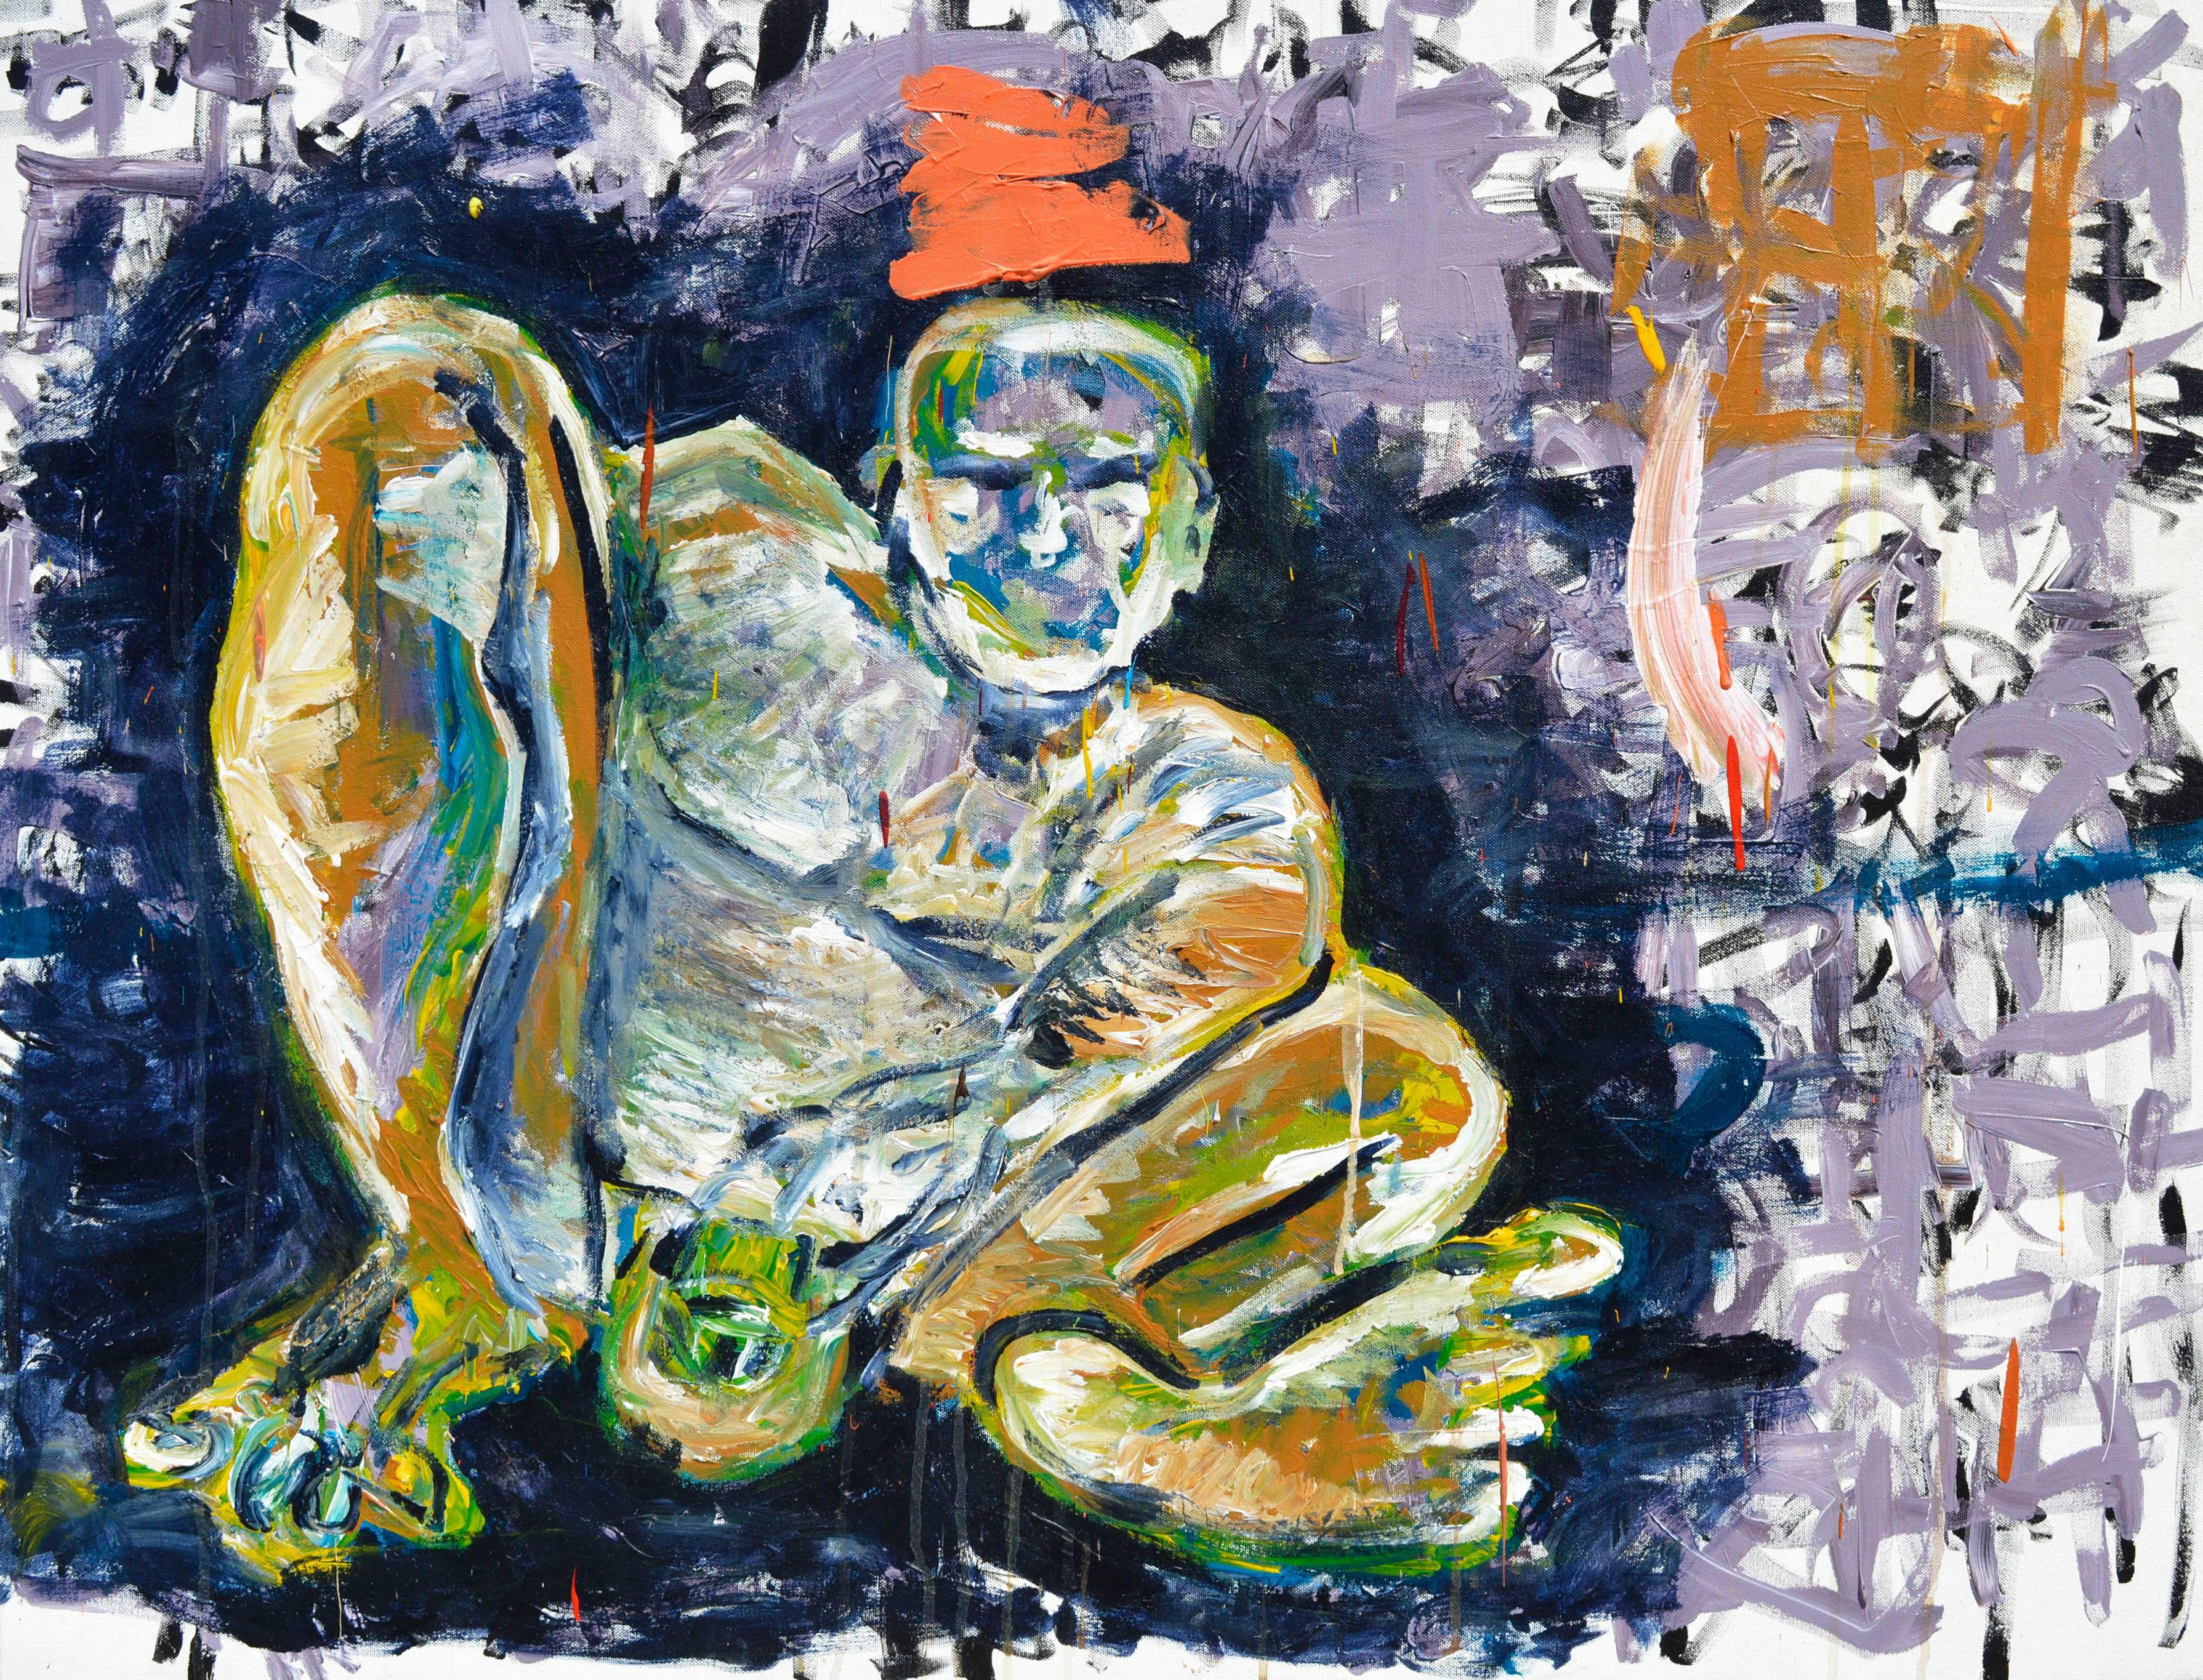 Daniel David Fuentes Figurative Painting - Abstract Expressionist Seated Figure with Clown Hat